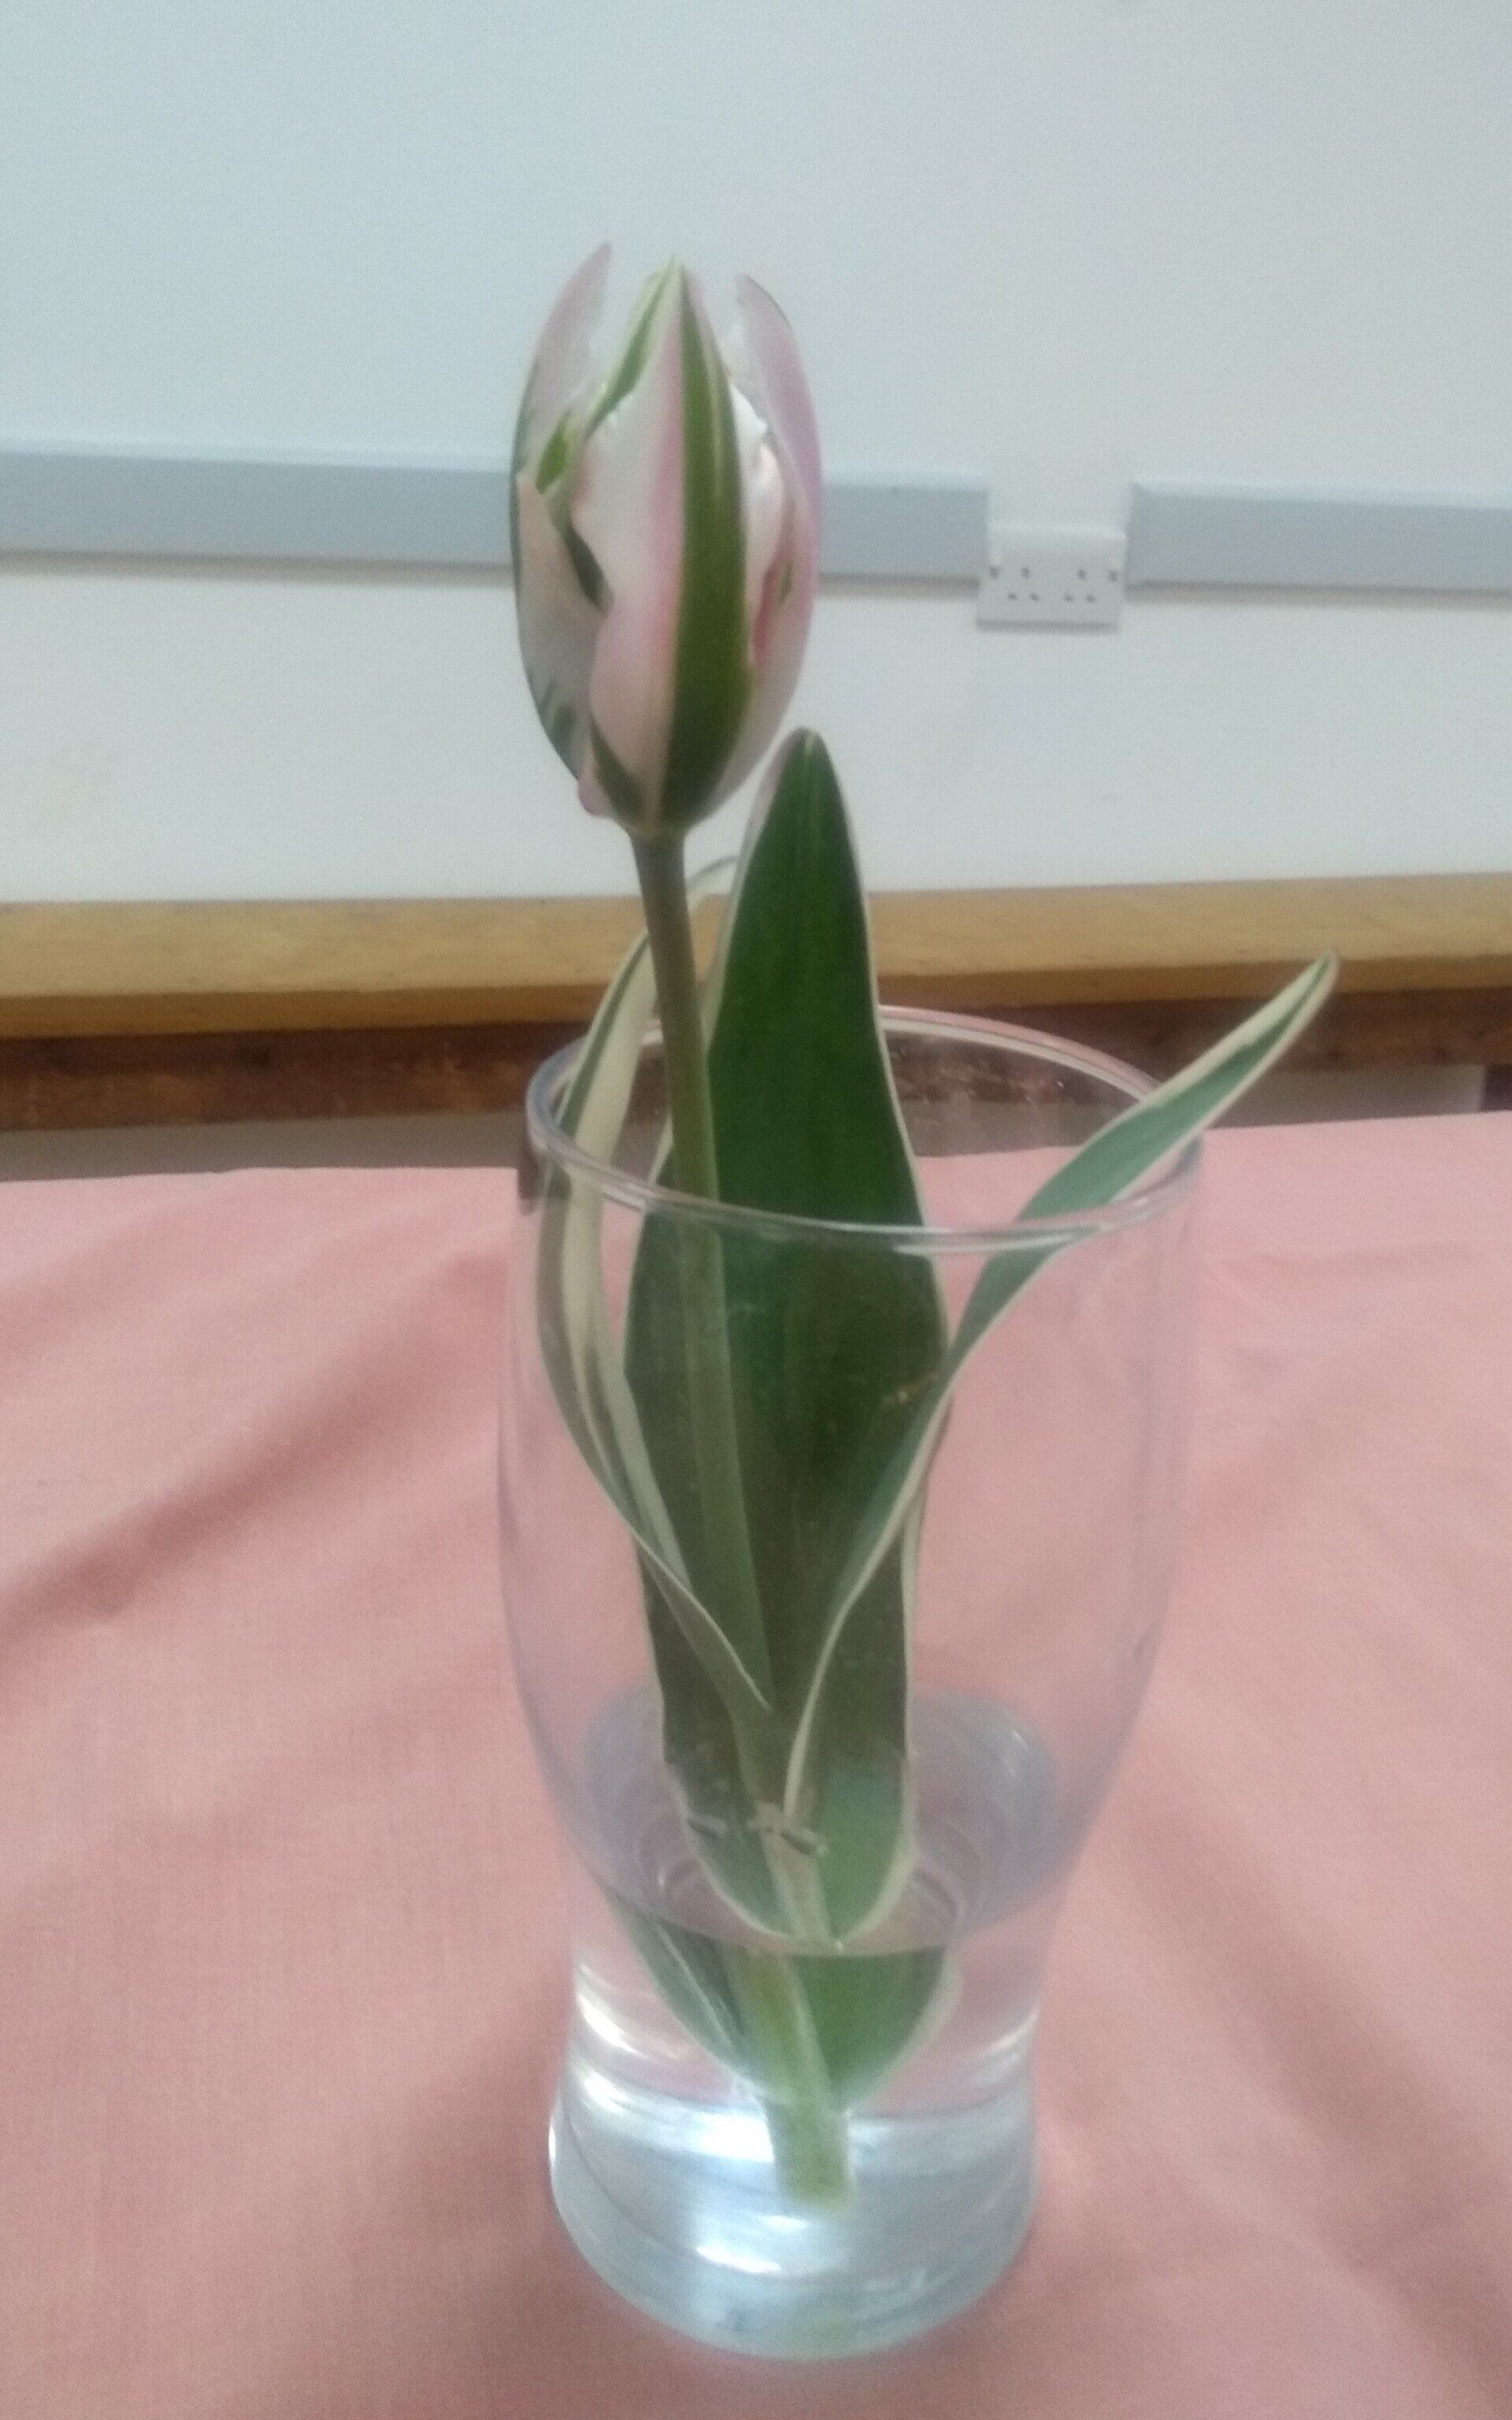 3rd place pink tulip with yellow and green stips Ann C